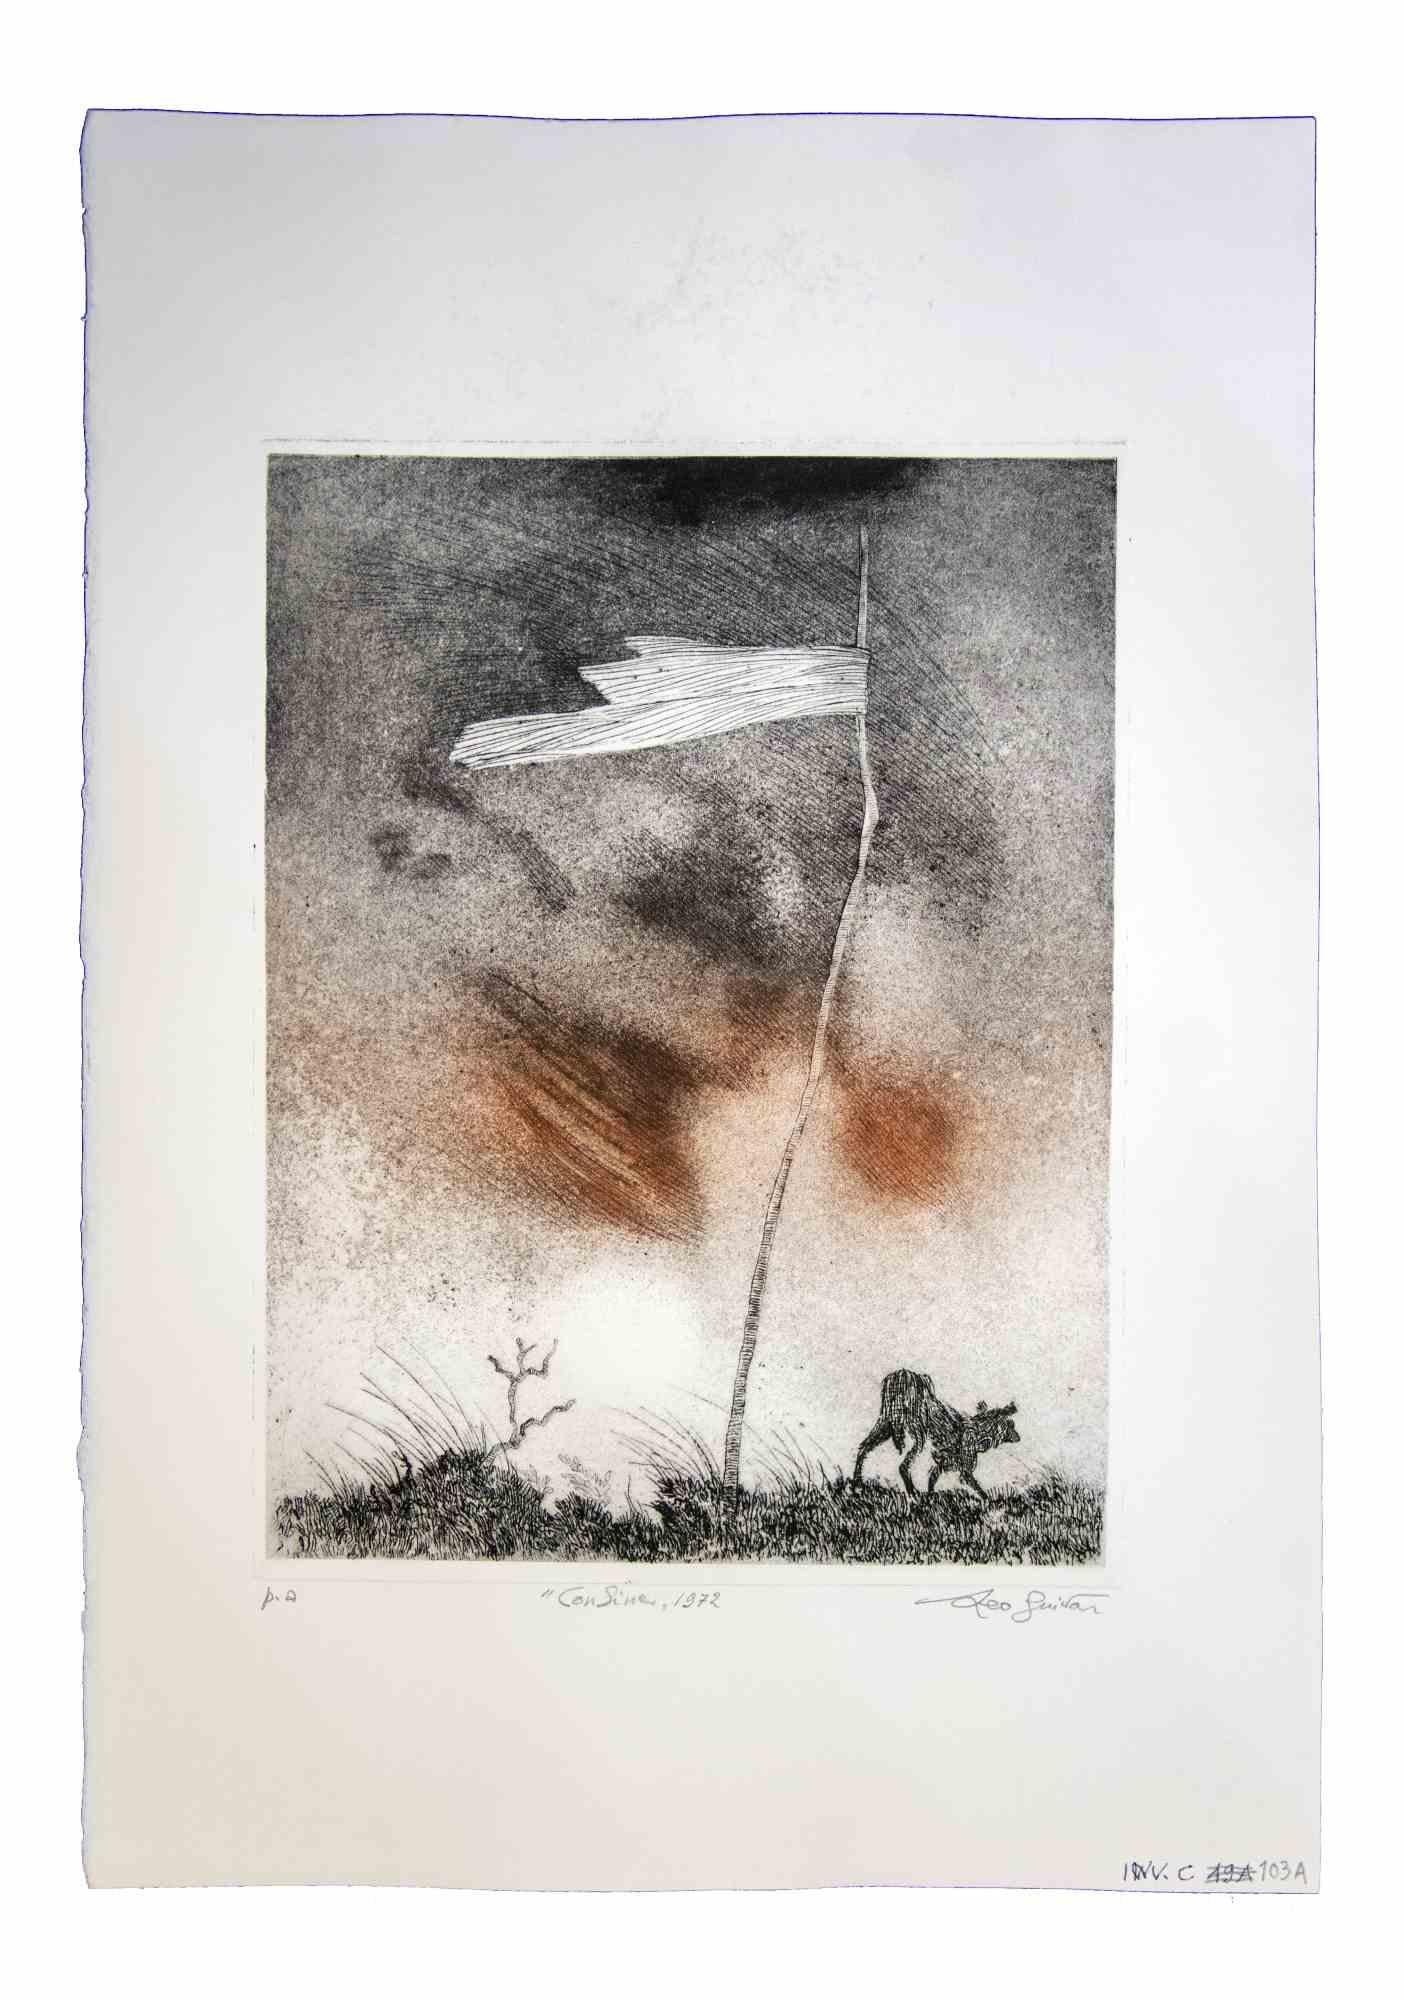 Boundary is an original etching and aquatint realized by Leo Guida in 1970s.

Good condition, artist proof, signed and titled.

Mounted on a white cardboard passpartout (50x34 cm).

Leo Guida  (1992 - 2017). Sensitive to current issues, artistic